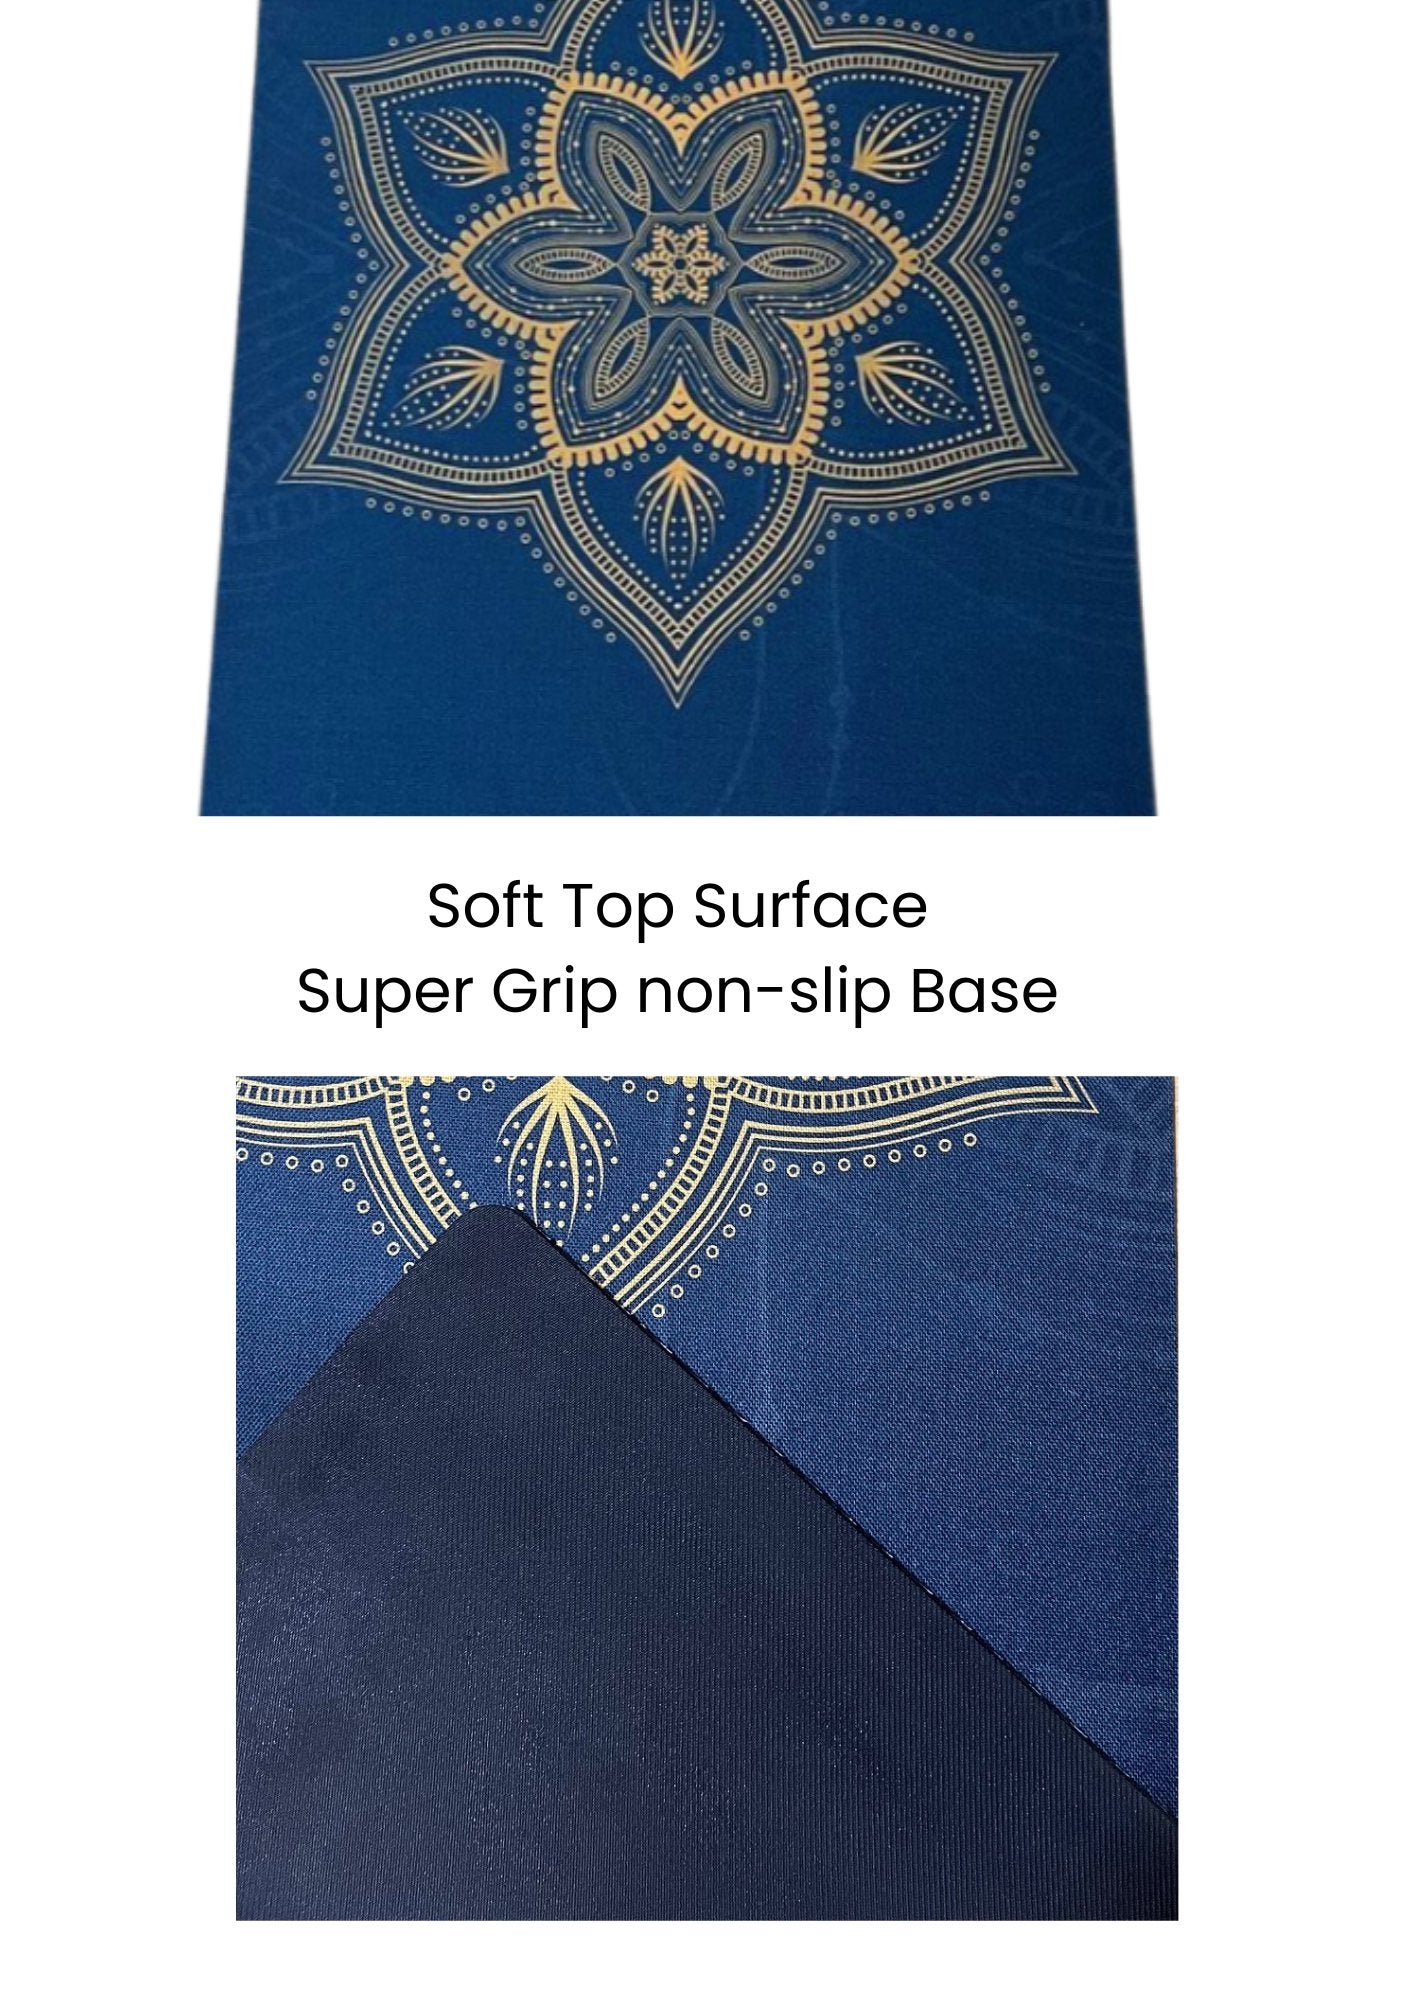 &quot;Soft top hemp jute yoga mat: Eco-conscious design with a super grip non-slip base for added stability.&quot;